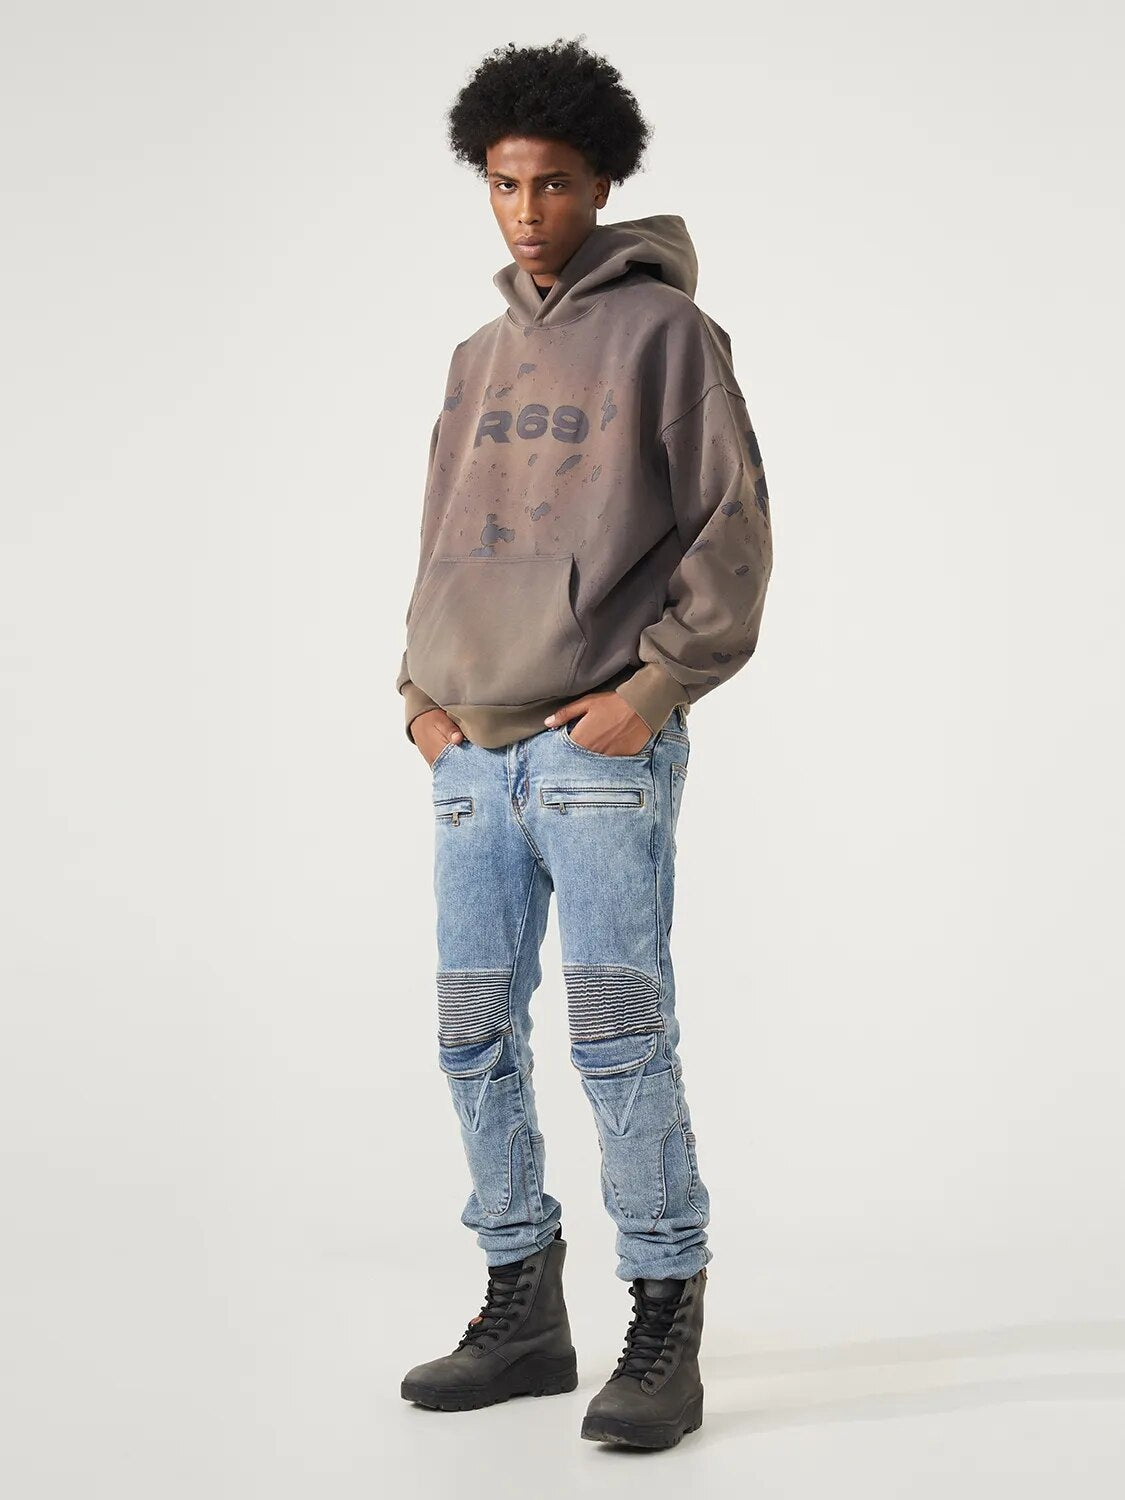 R69 Retro washed letter printing hoodie